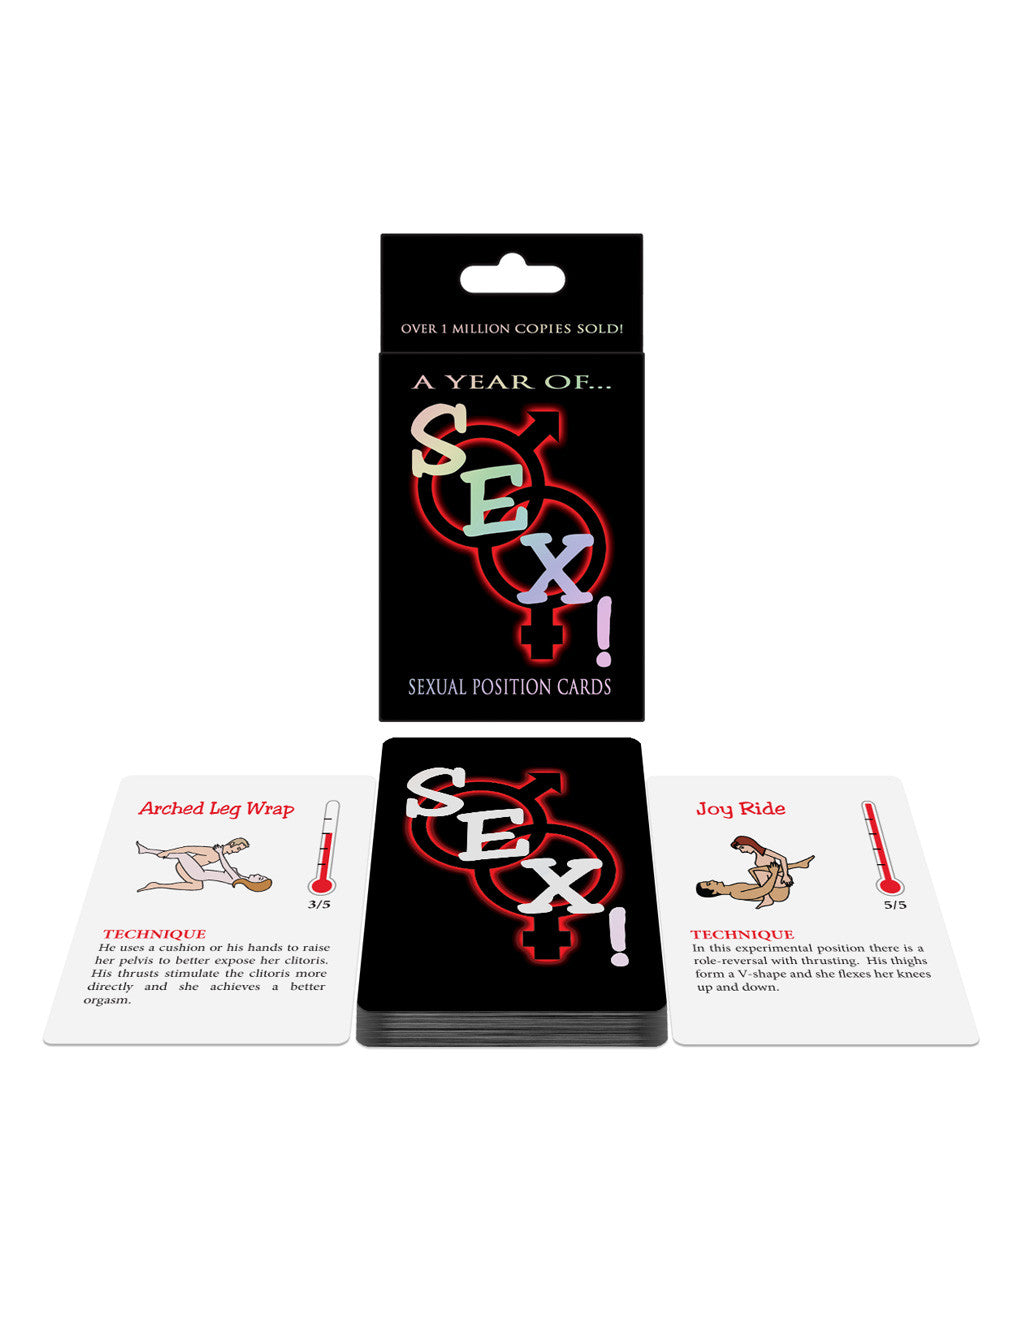 A Year of Sex! Sexual Position Cards